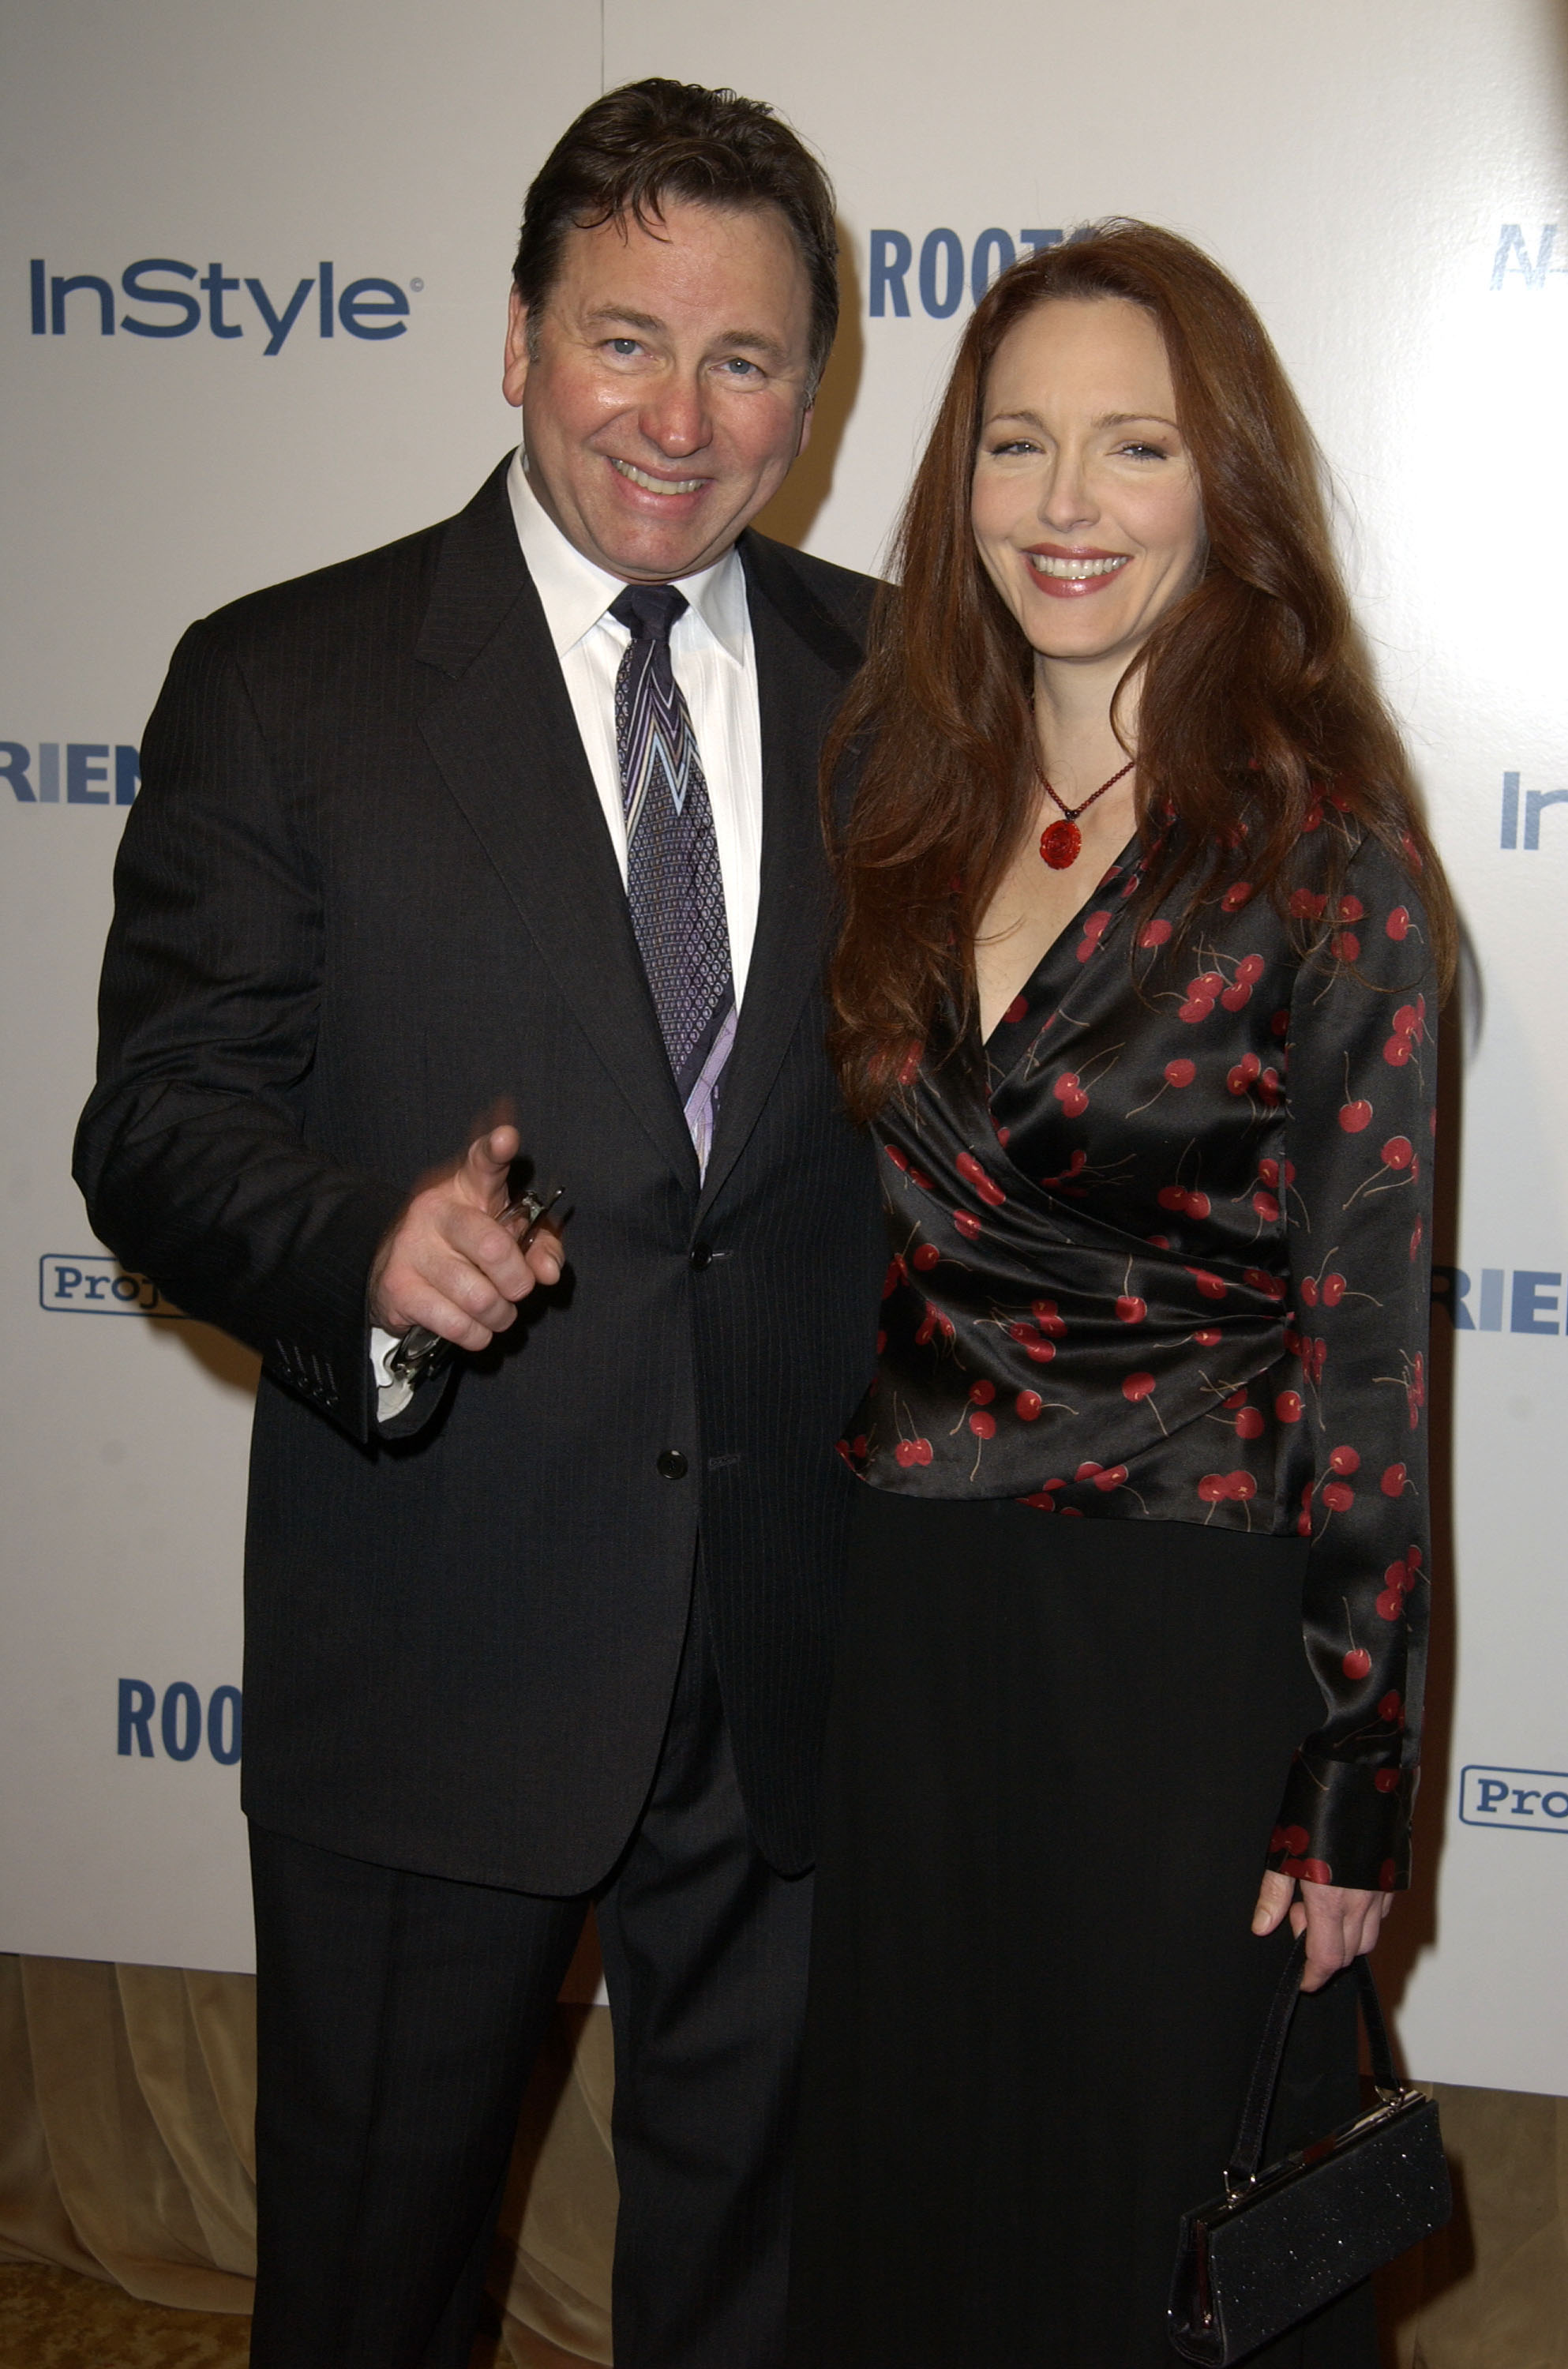 John Ritter and Amy Yasbeck, circa 2003   | Source: Getty Images